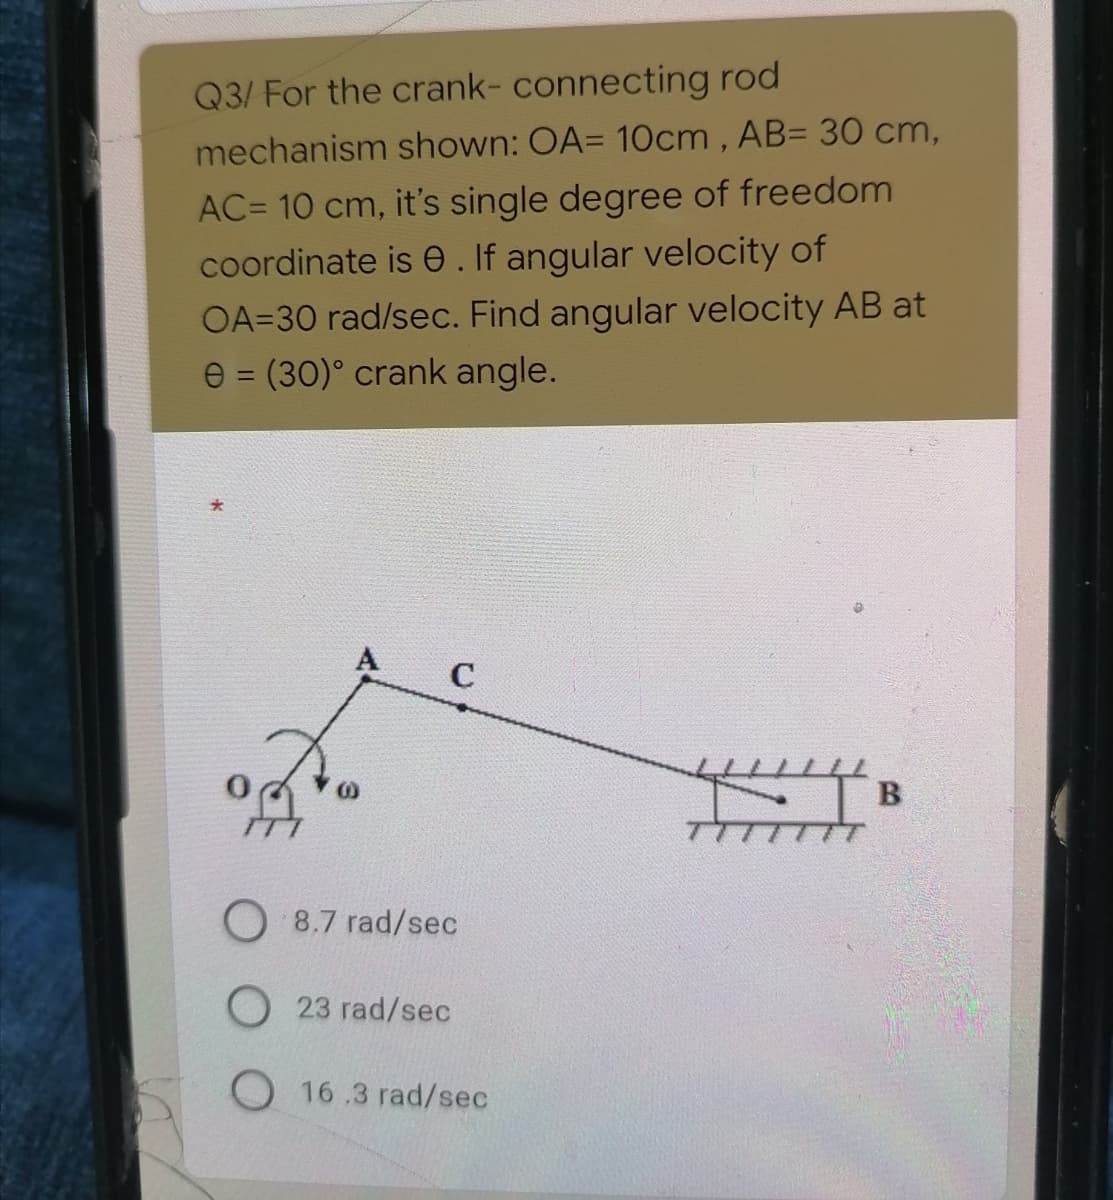 Q3/ For the crank- connecting rod
mechanism shown: OA= 10cm , AB= 30 cm,
AC= 10 cm, it's single degree of freedom
coordinate is e. If angular velocity of
OA=30 rad/sec. Find angular velocity AB at
e = (30)° crank angle.
A
C
8.7 rad/sec
O23 rad/sec
O 16.3 rad/sec
